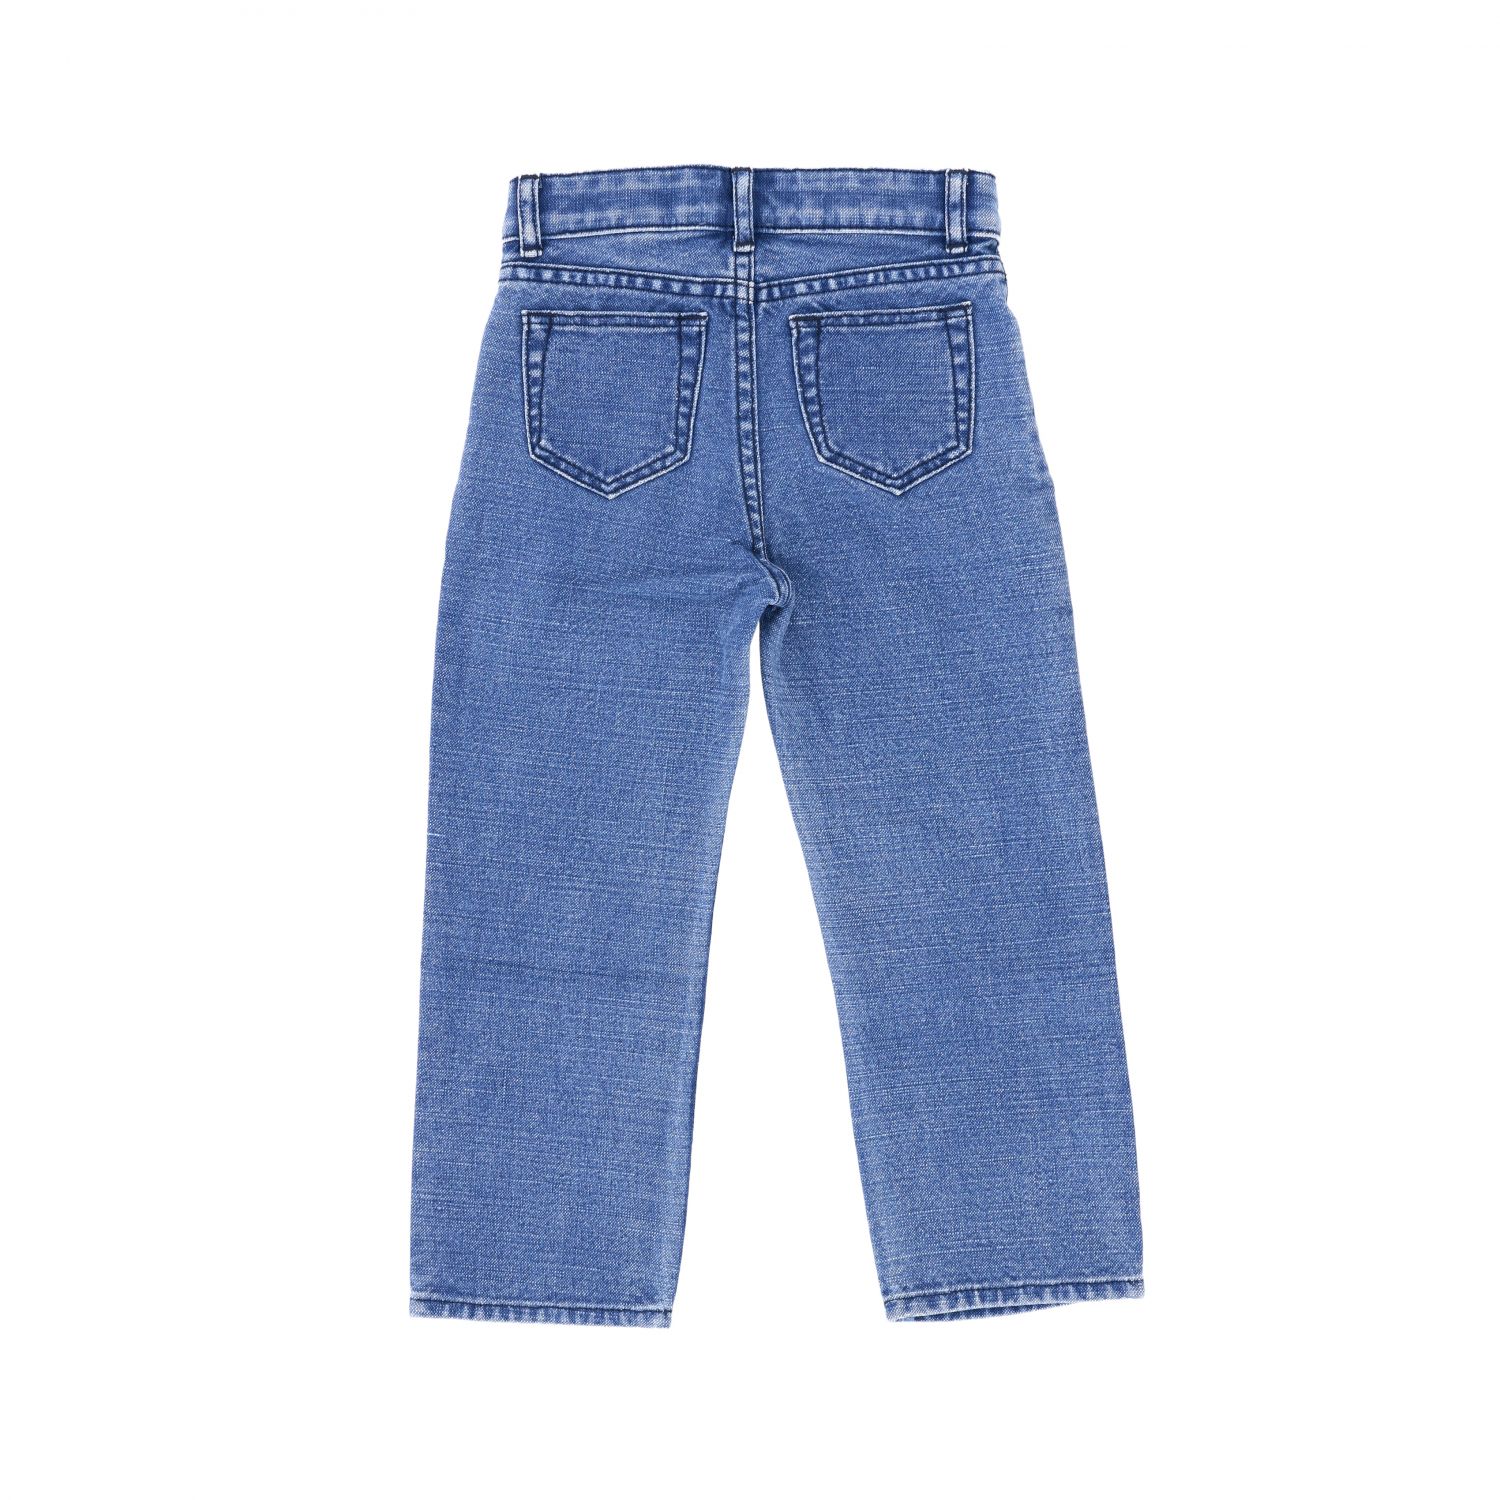 Burberry Outlet: denim jeans with printed logo | Jeans Burberry Kids ...